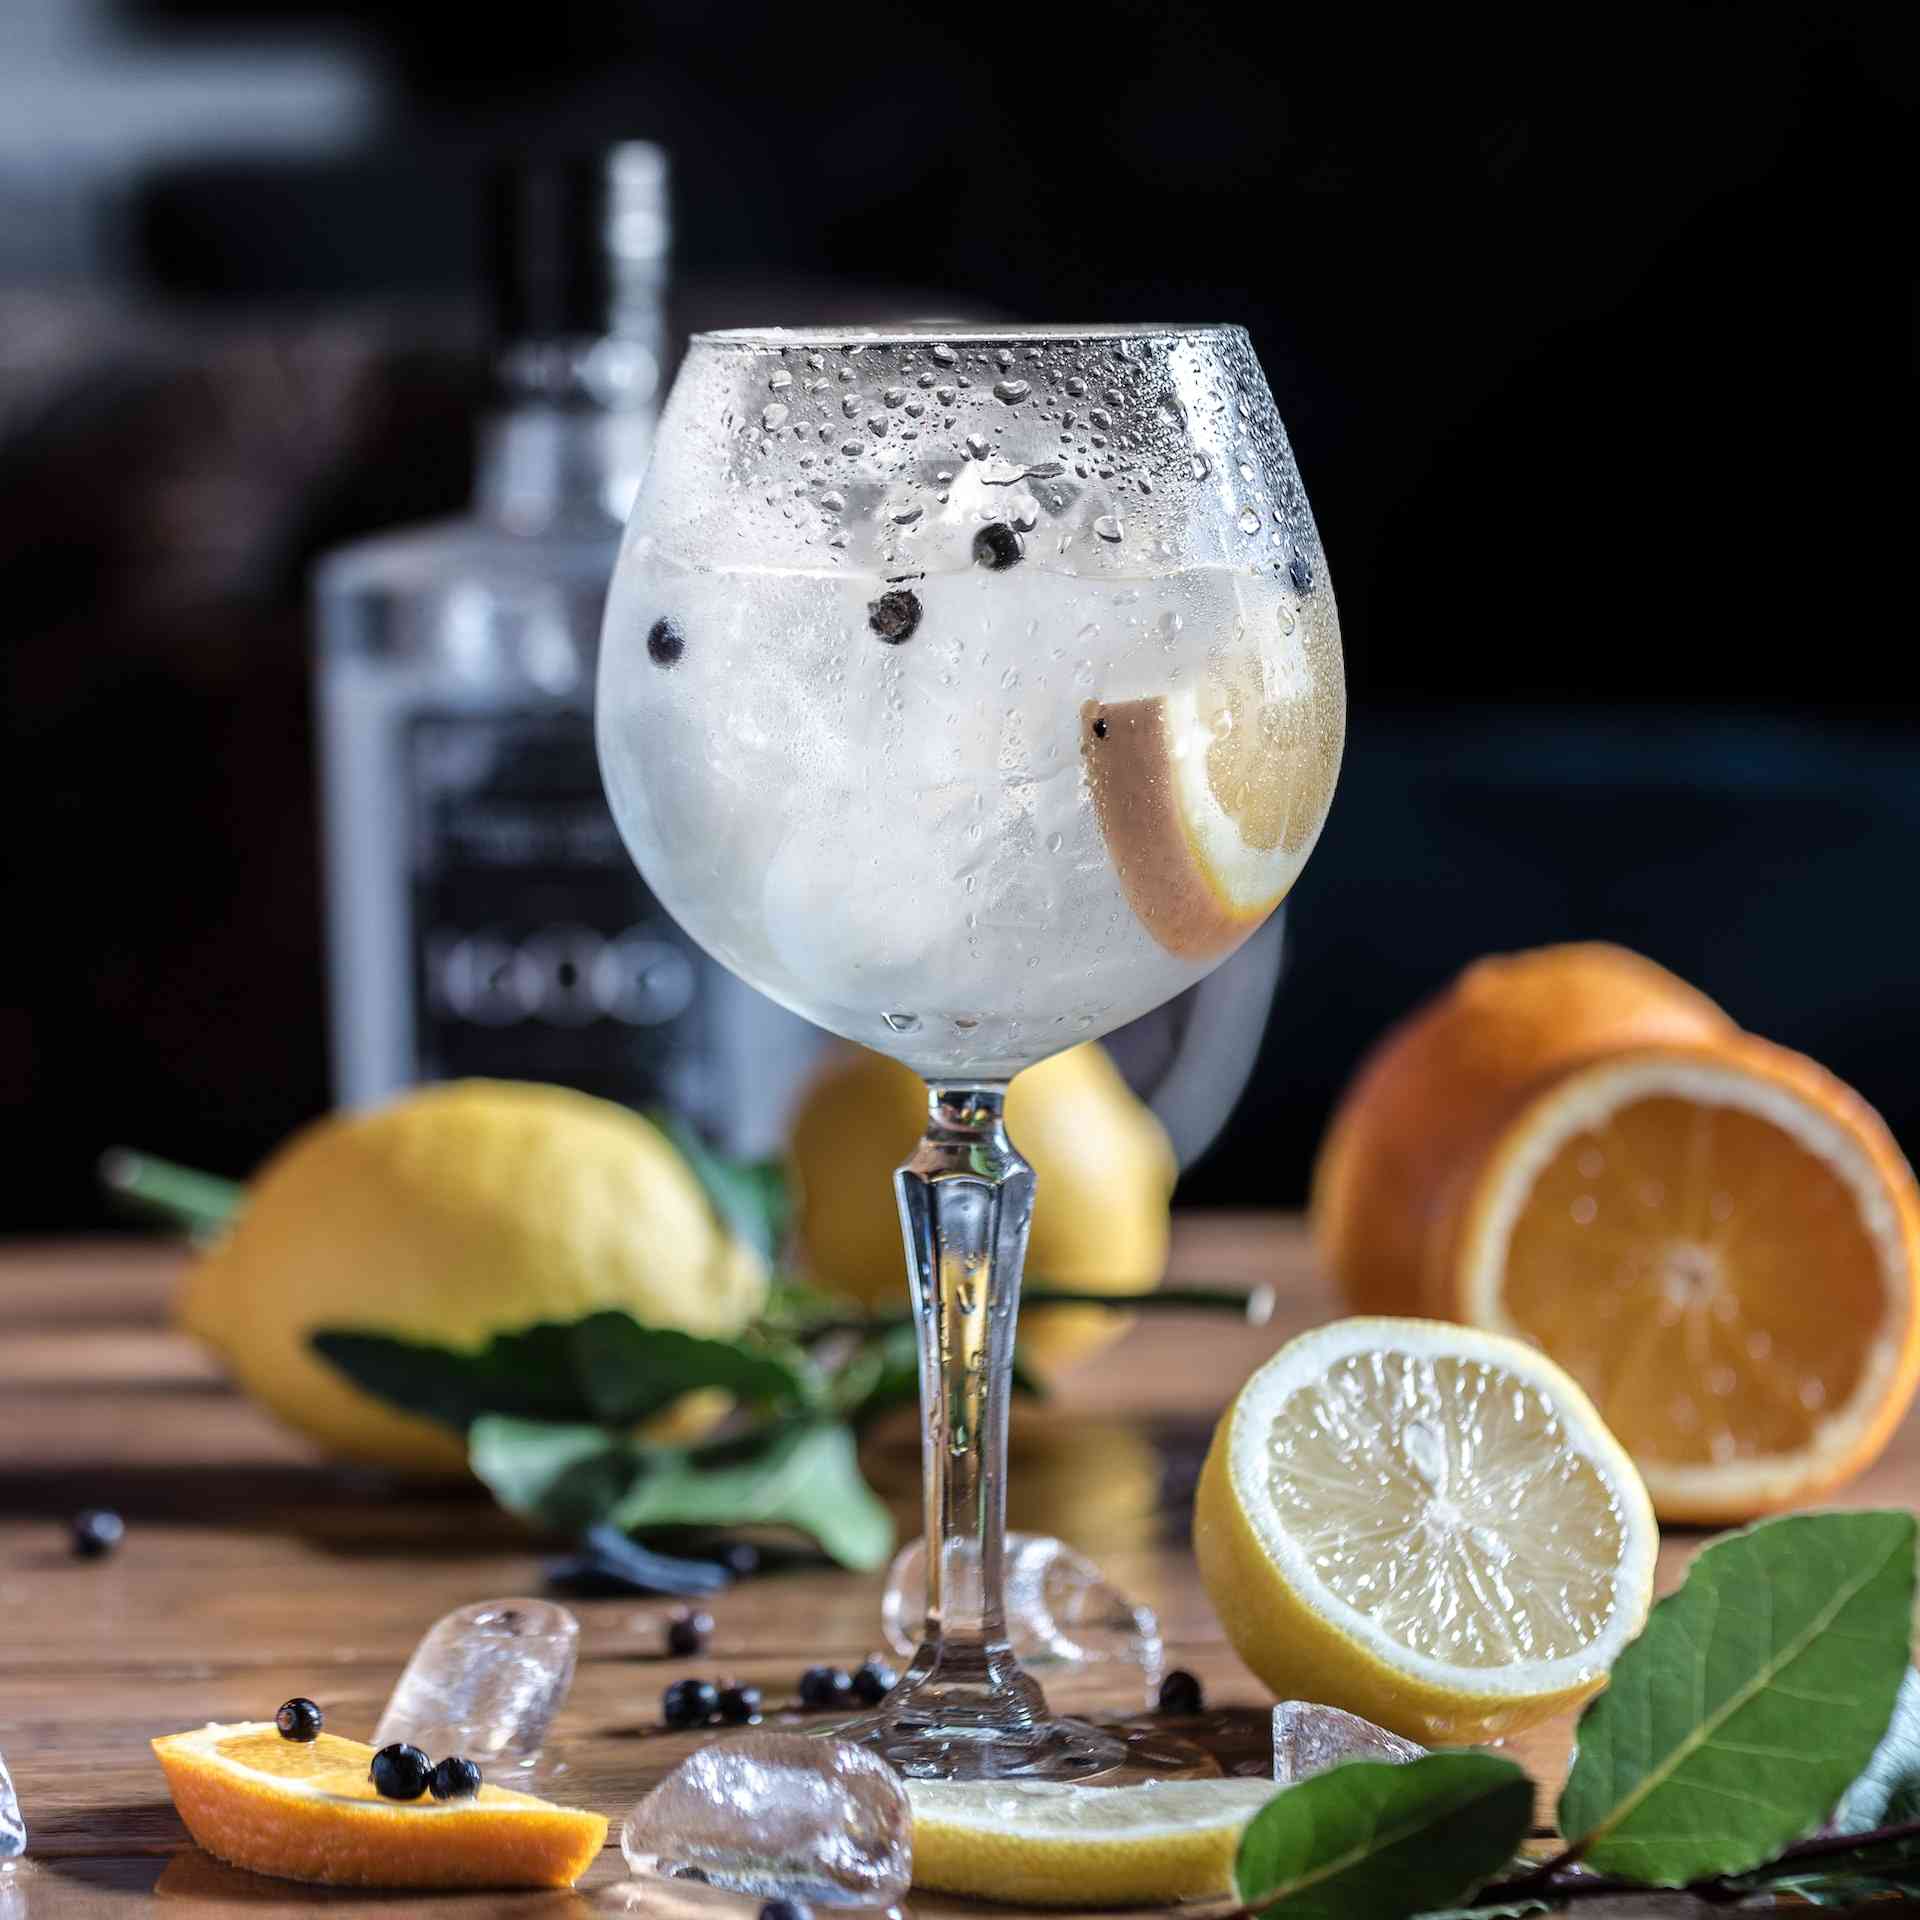 A Guide to Taste and Appreciate New Zealand's Exceptional Gins